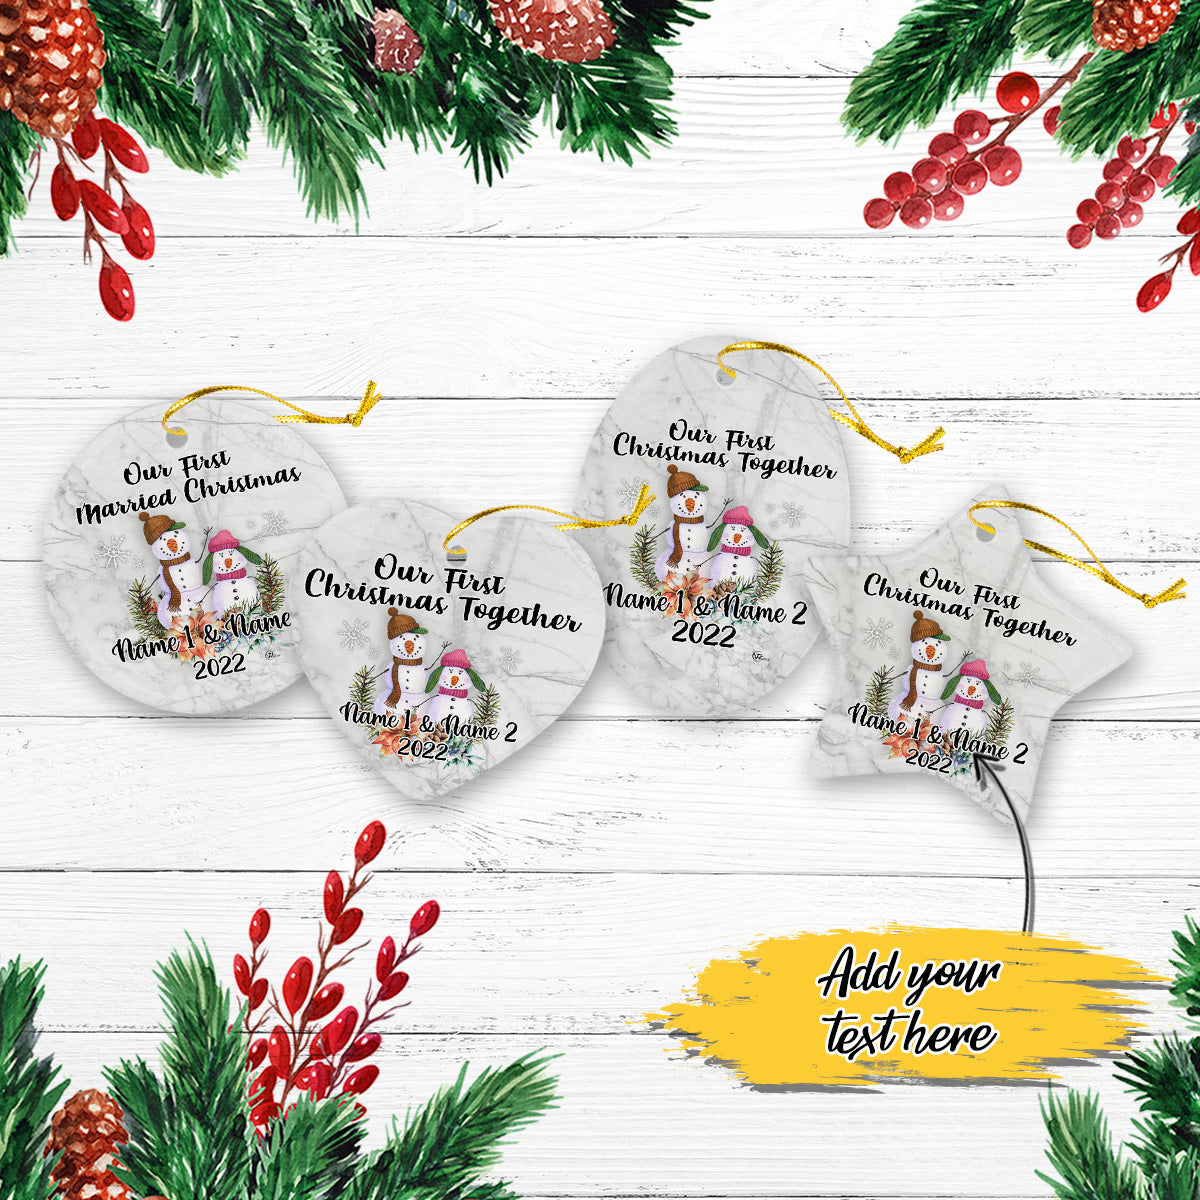 Snowman Our First Christmas Together Ornament Personalized Christmas Premium Ceramic Ornaments Sets